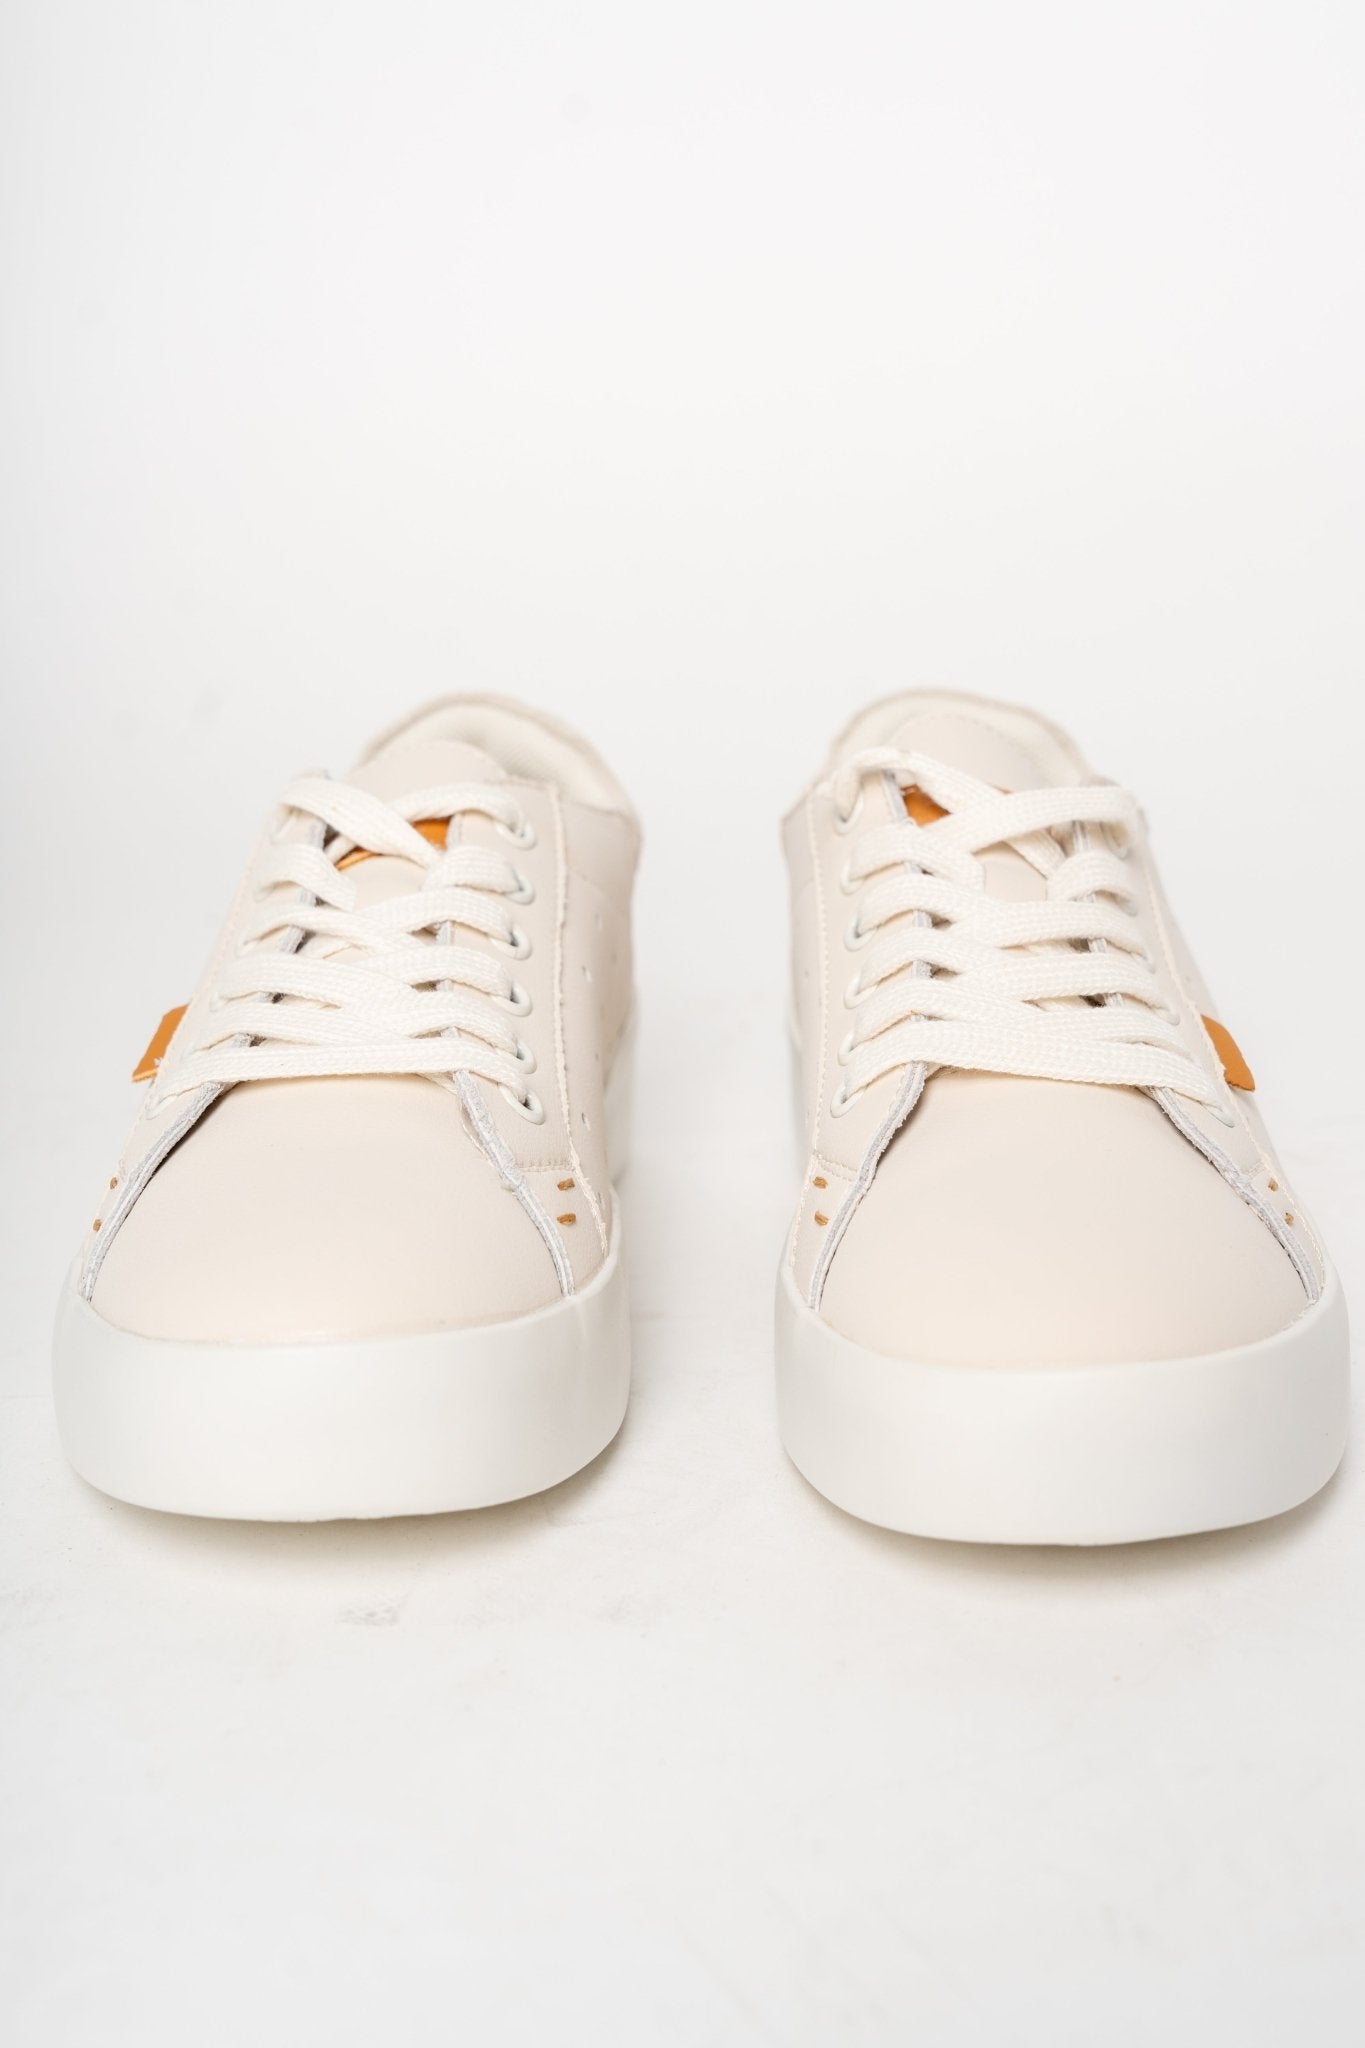 Shauna sneaker nude - Trendy Shoes - Fashion Shoes at Lush Fashion Lounge Boutique in Oklahoma City